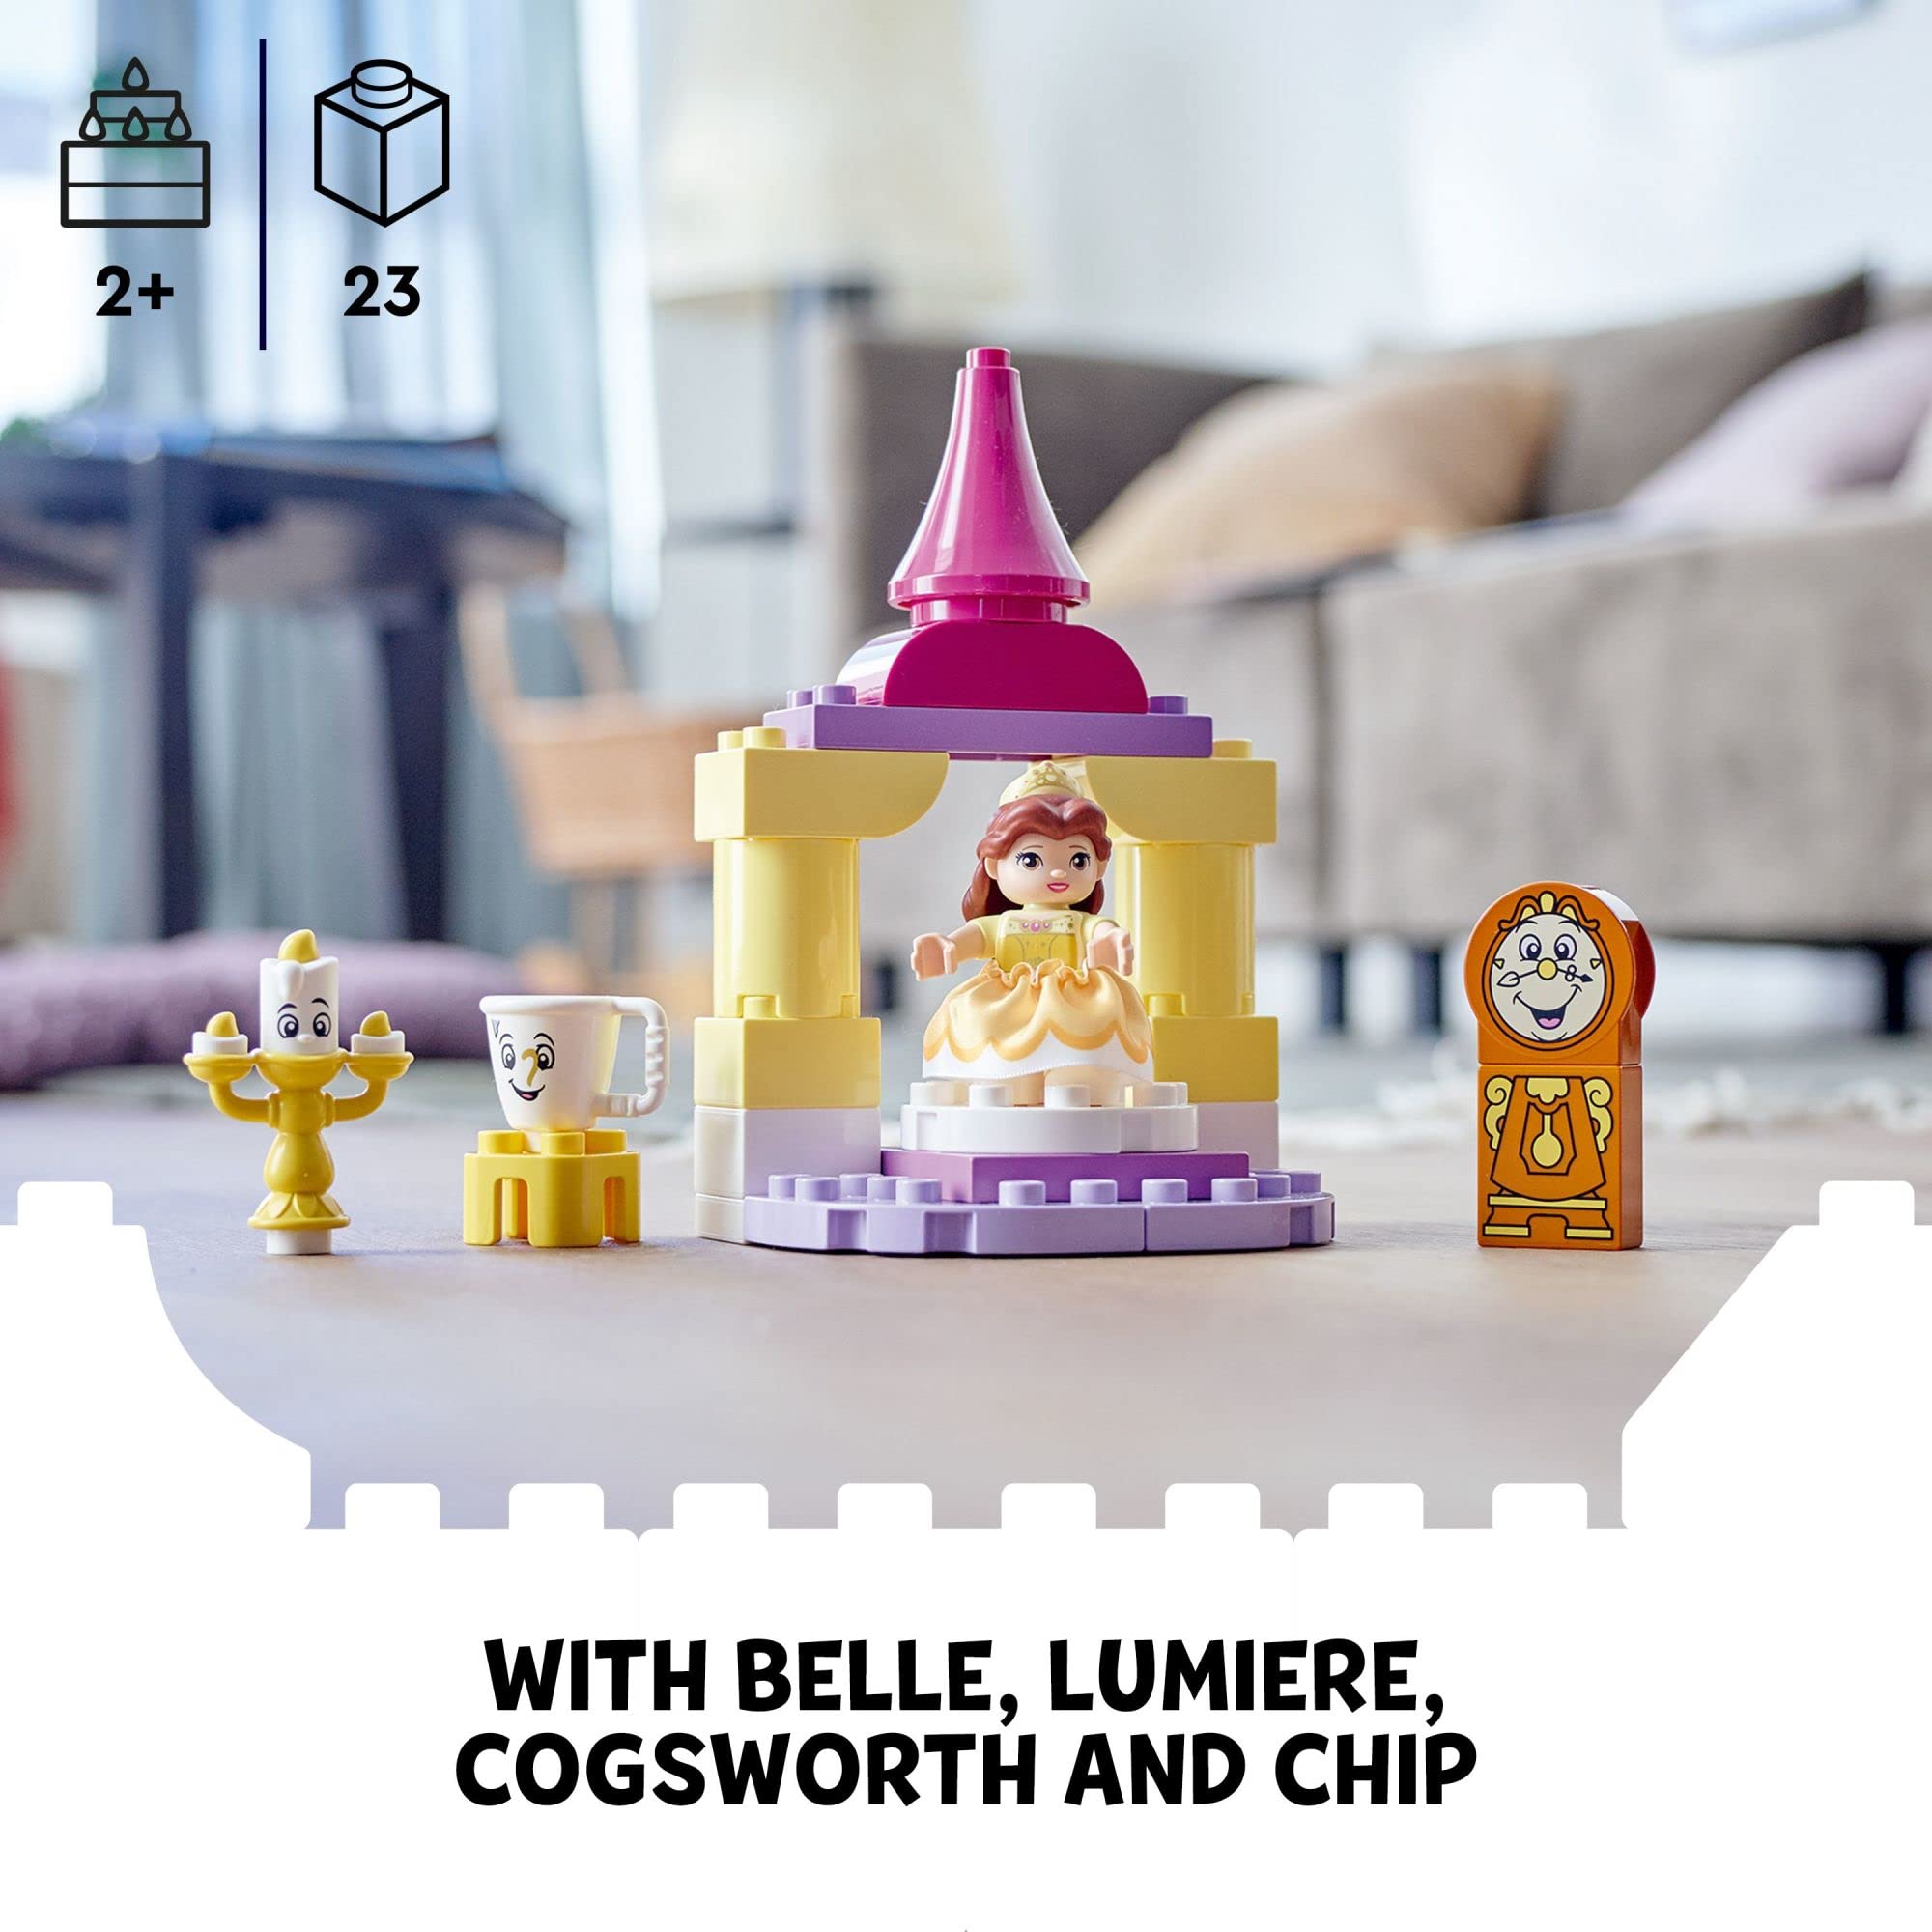 LEGO DUPLO Disney Princess Belle's Ballroom Castle 10960, Beauty and The Beast Building Toy with Princess Belle Mini Doll, Disney Pretend Play Set for Toddlers, Girls and Boys 2 Plus Years Old